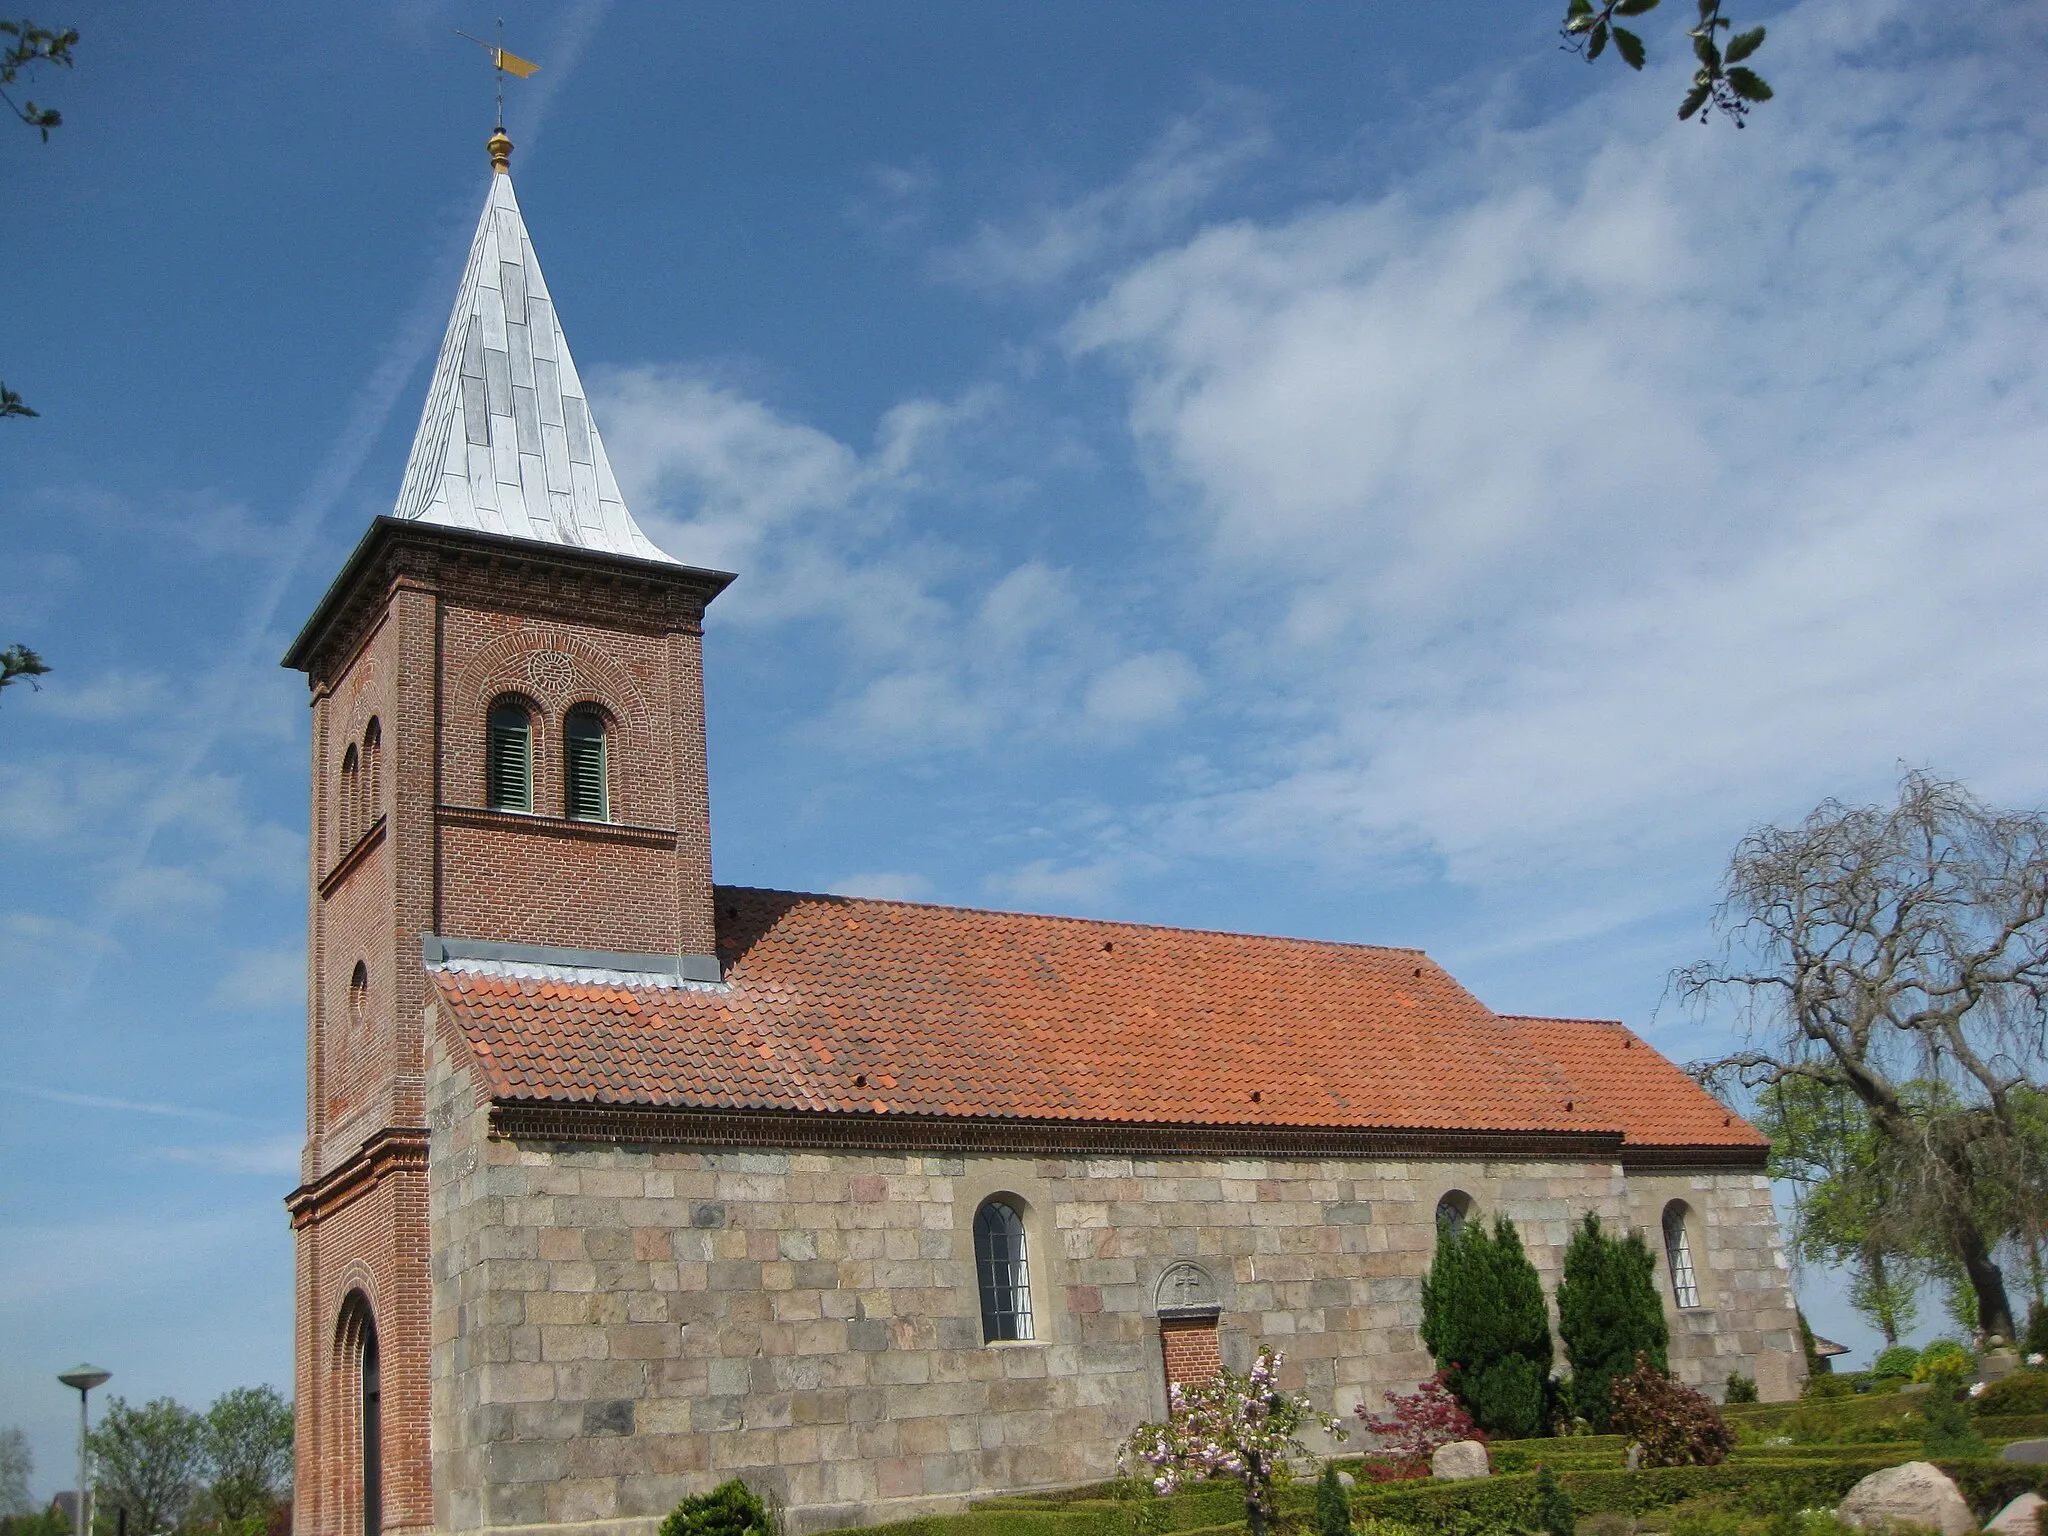 Photo showing: The church "Trige Kirke" in the small town "Trige" north of Aarhus. The town is located in East Jutland, Denmark.